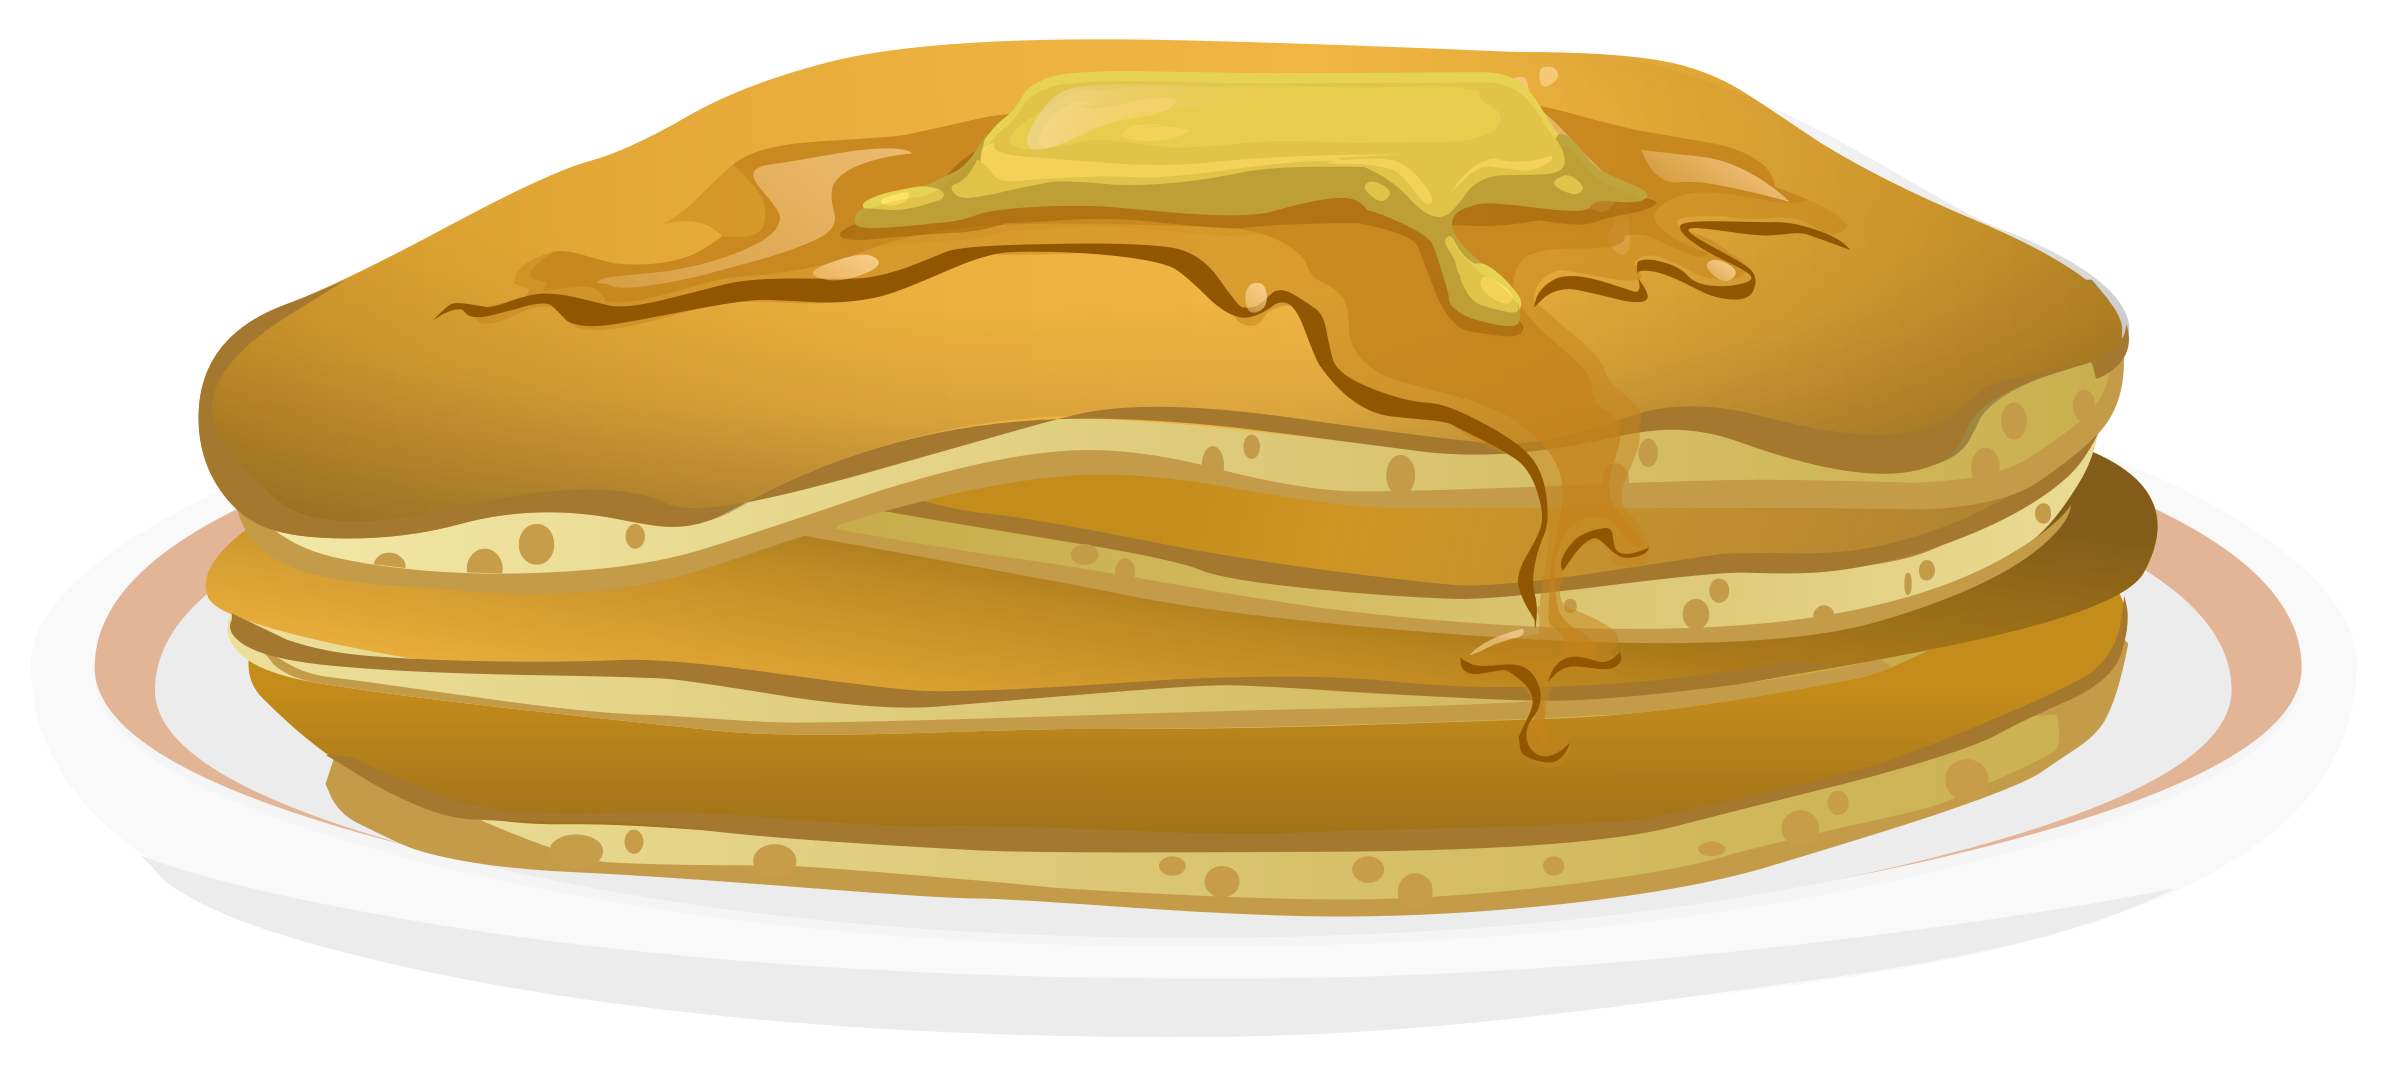 free clipart images pancakes - photo #44